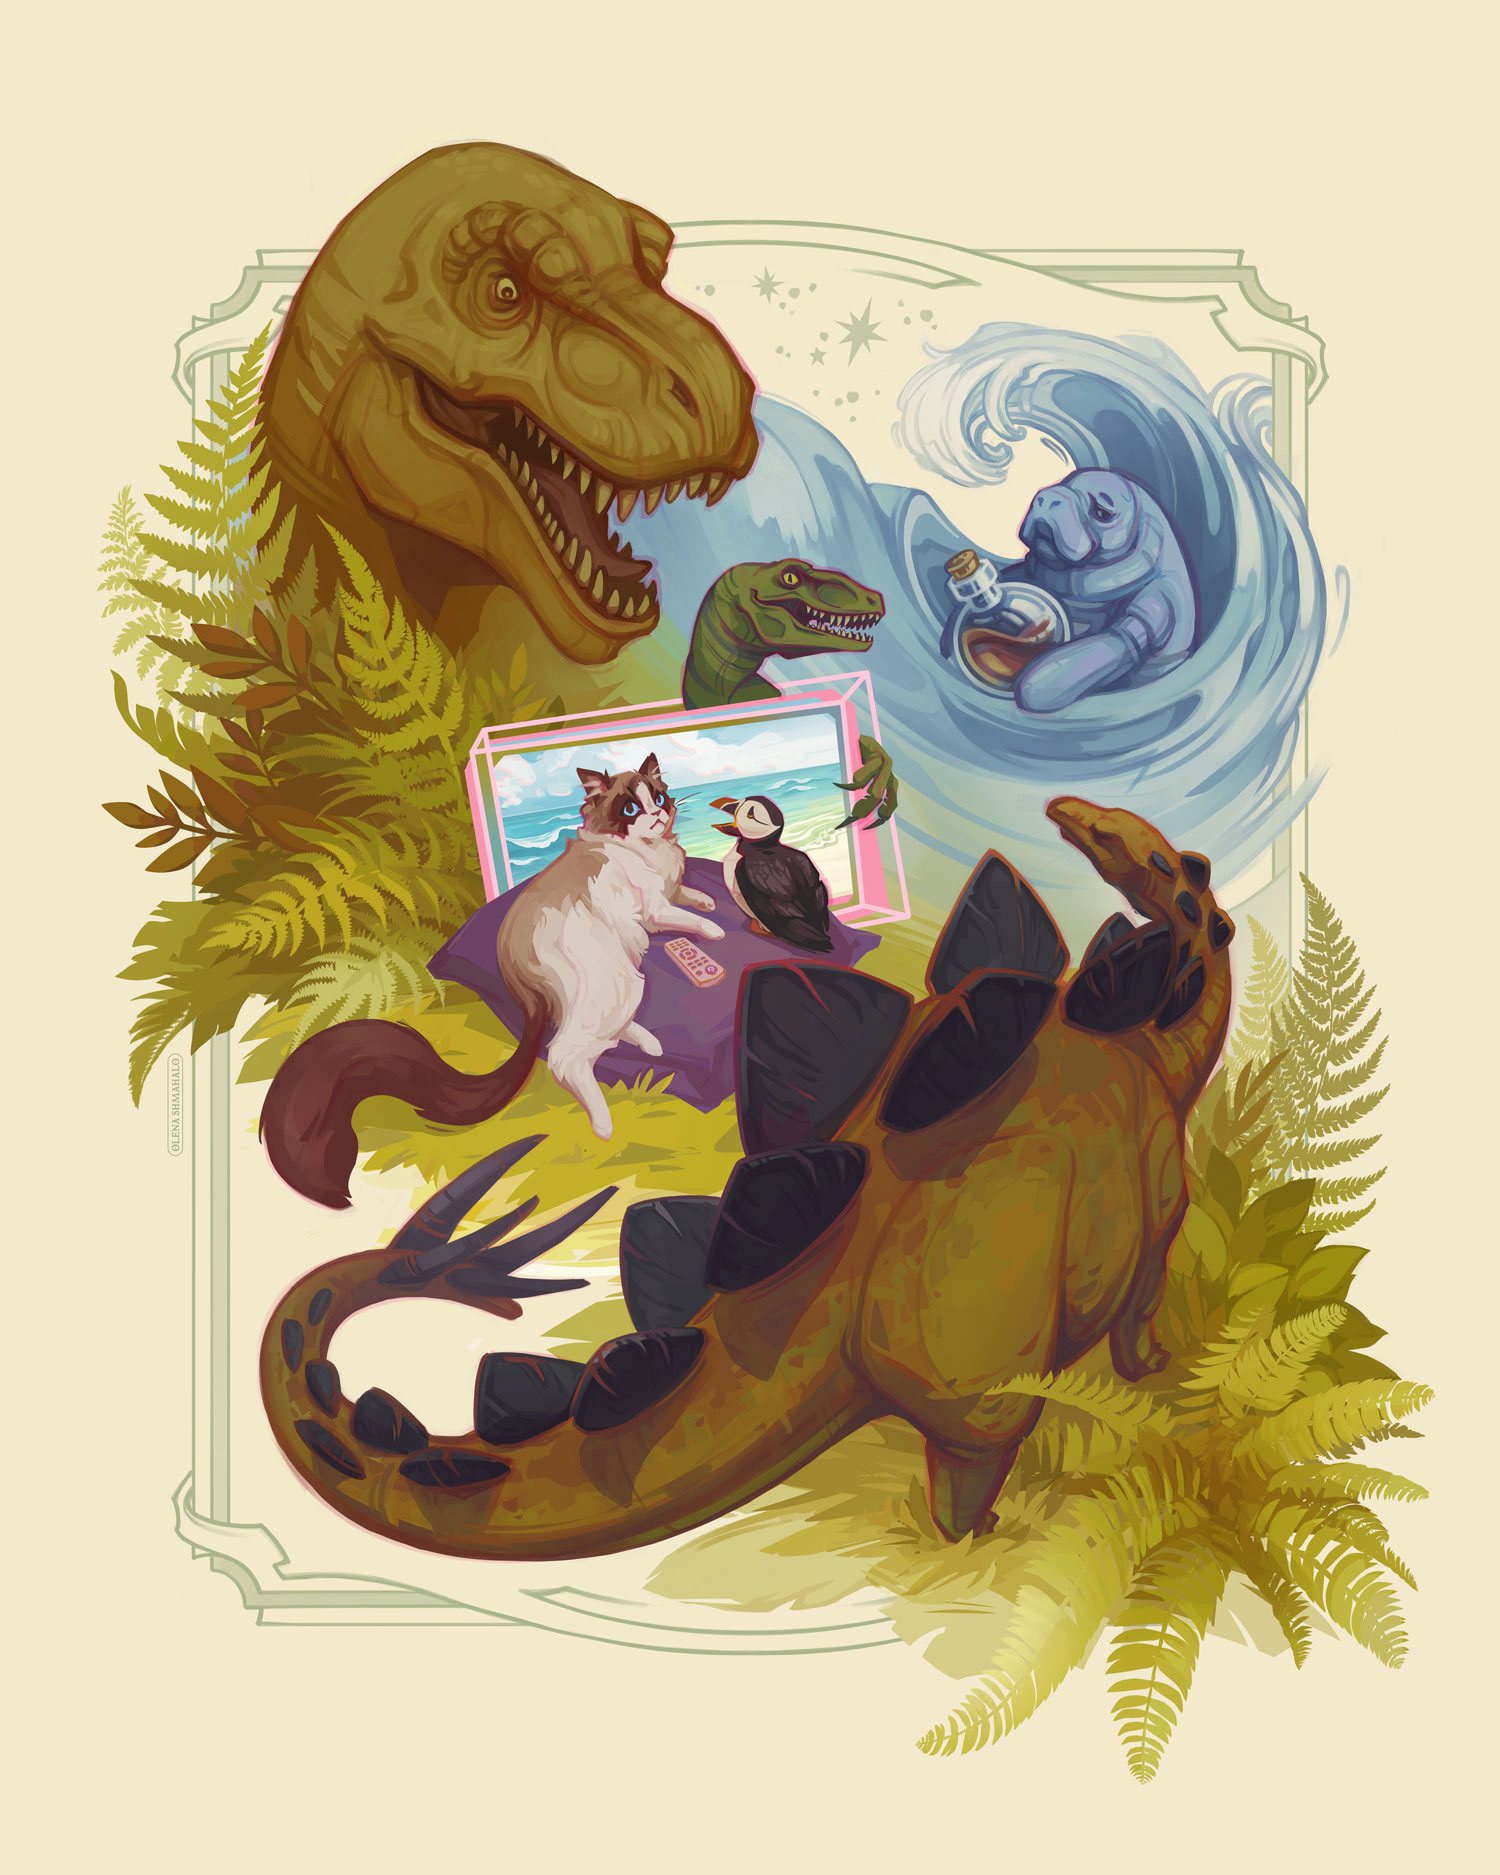 Stylized illustration of six animals. Top-left: A Tyrannosaurus rex surveys the others from behind ferns & foliage. Top-right: A manatee holds a potion bottle as a wave curls around & over him. Middle: A Velociraptor peeks over the top of a graphical, pink TV displaying a beach scene; its claw grips one edge. A Ragdoll cat & puffin relax on a cushion in front of the TV. Bottom-right: Standing amidst ferns & cycads, a huge Stegosaurus looks up at the other creatures.